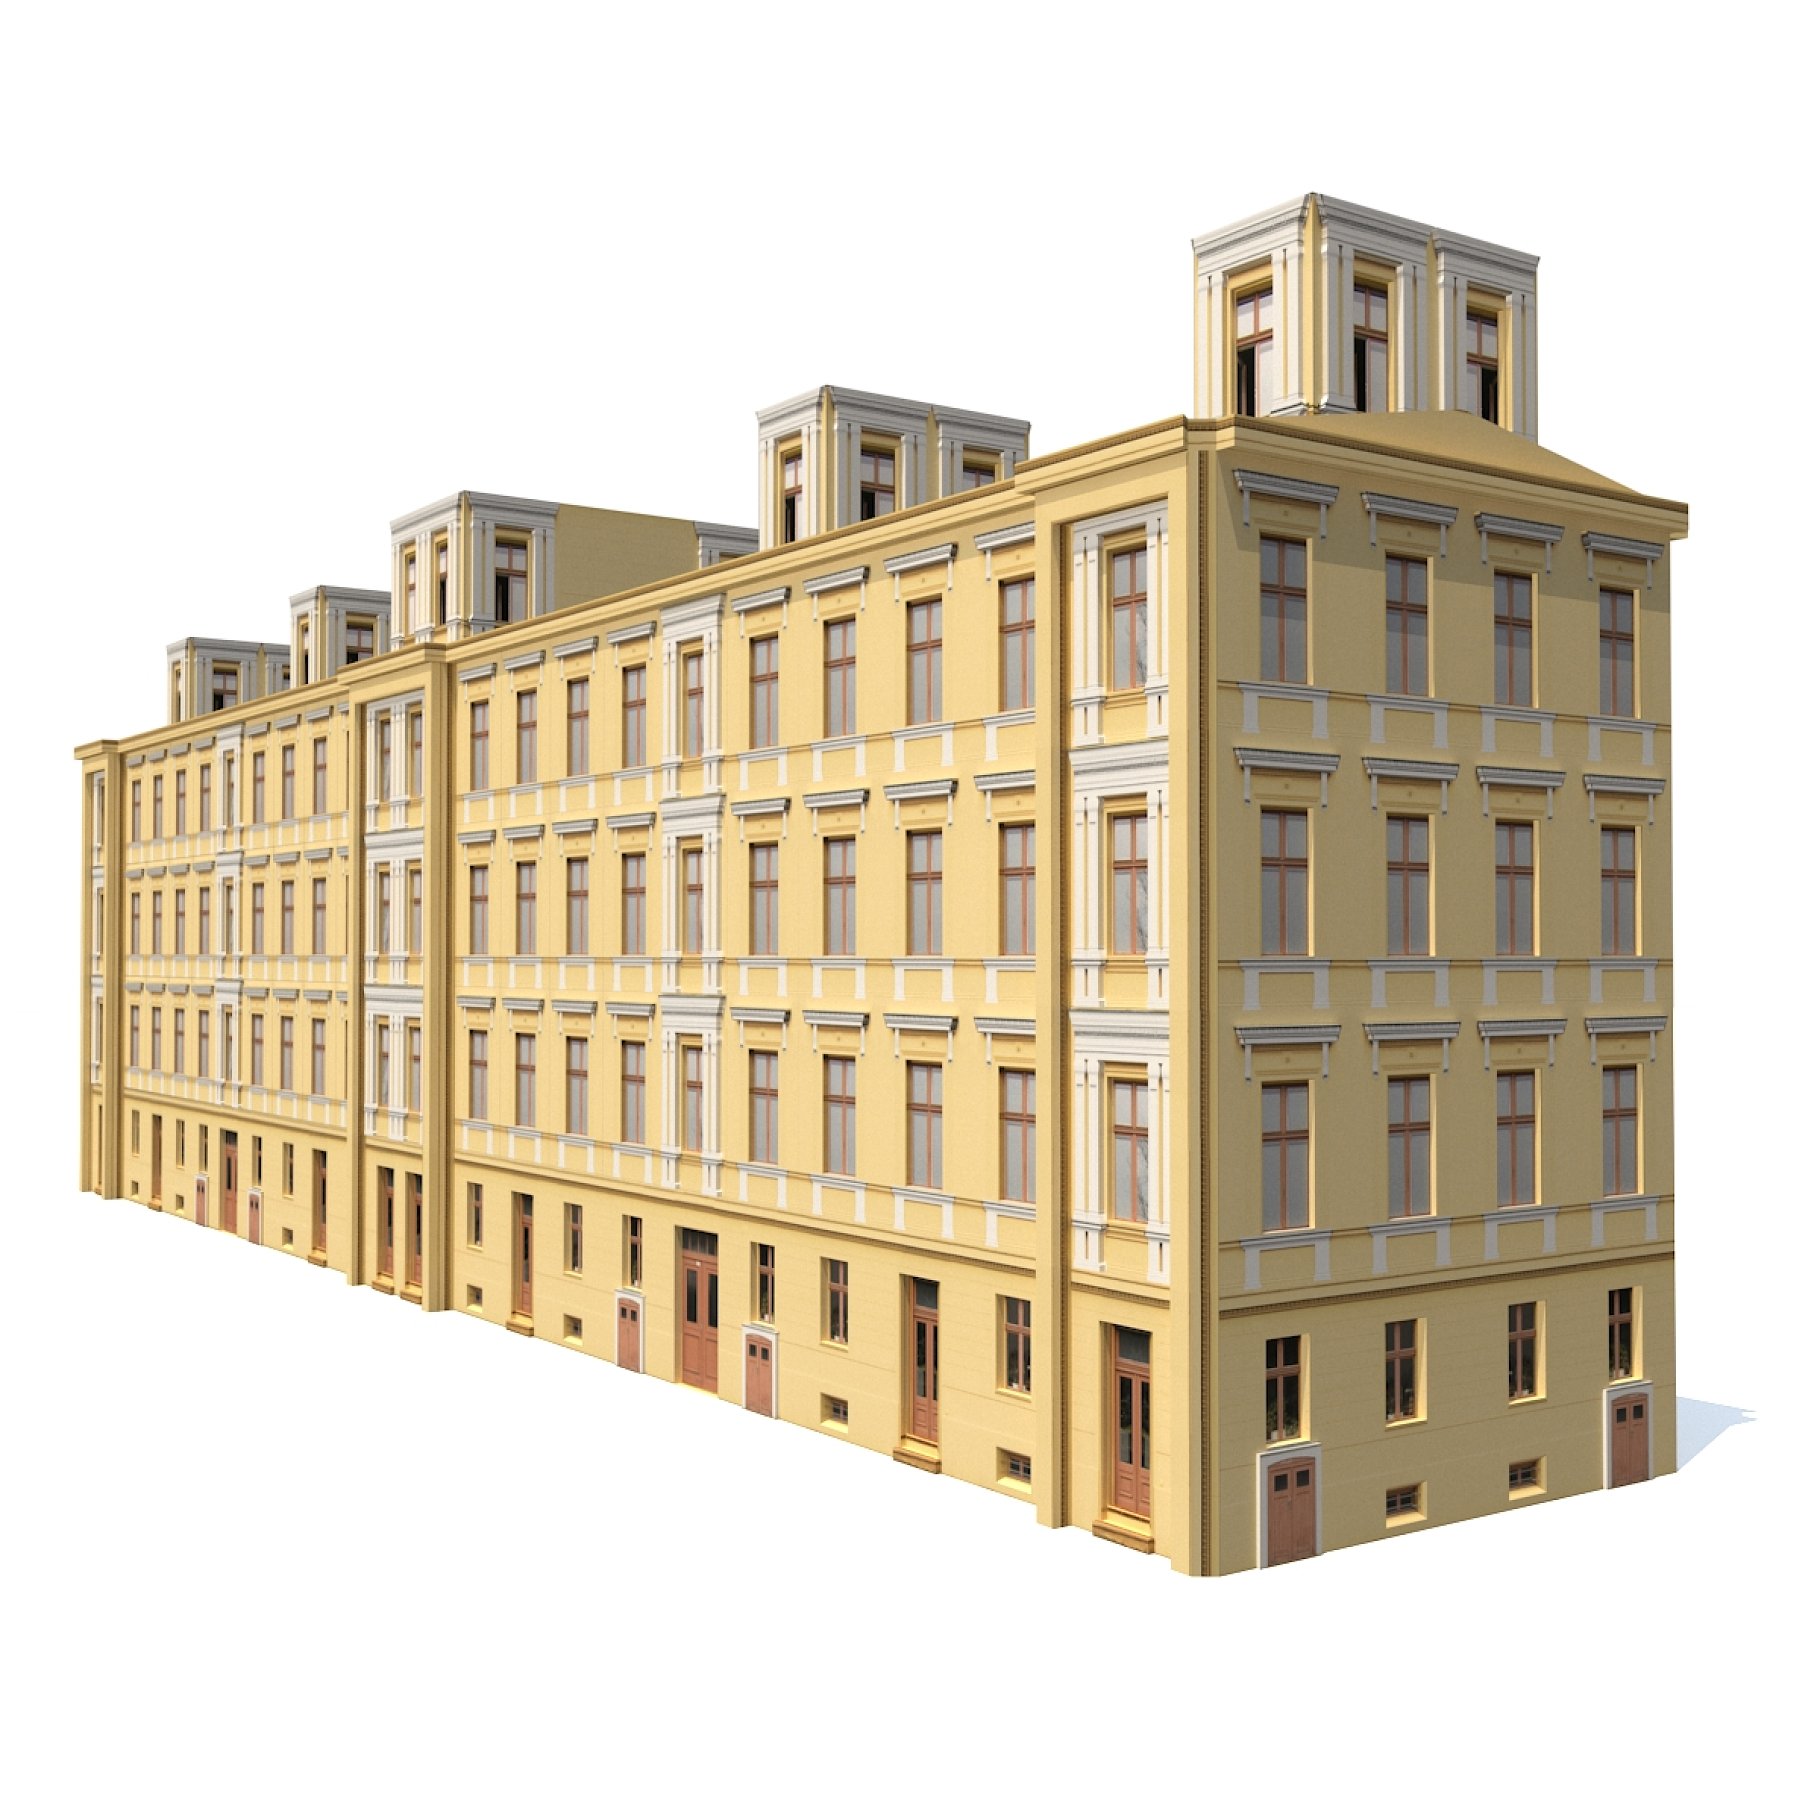 Rendering of a yellow building.